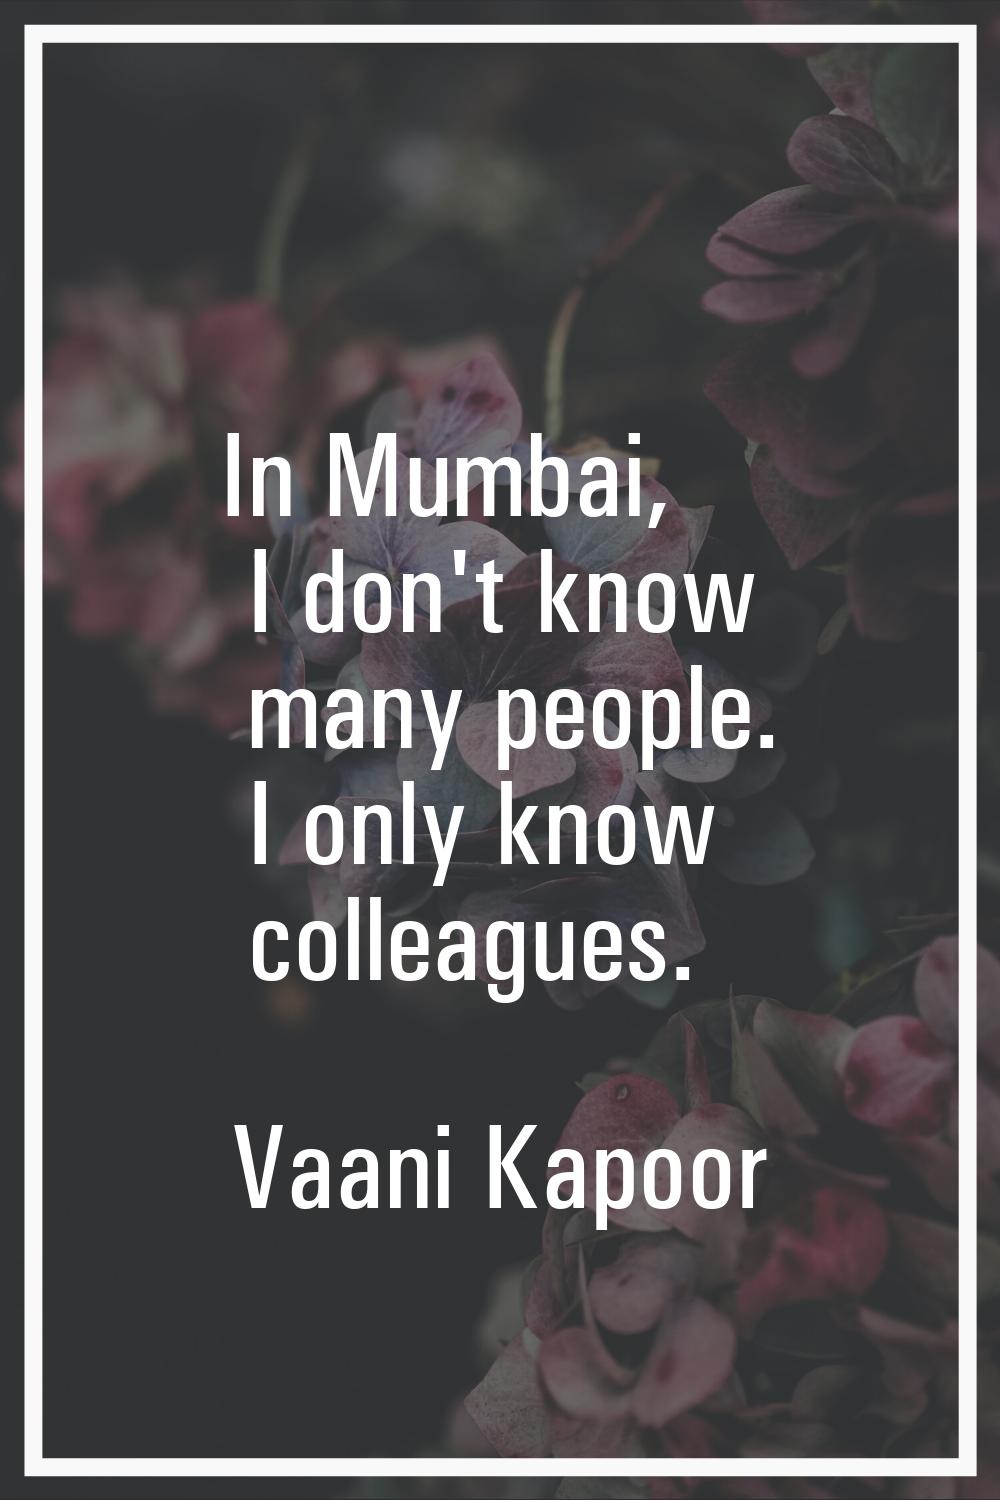 In Mumbai, I don't know many people. I only know colleagues.